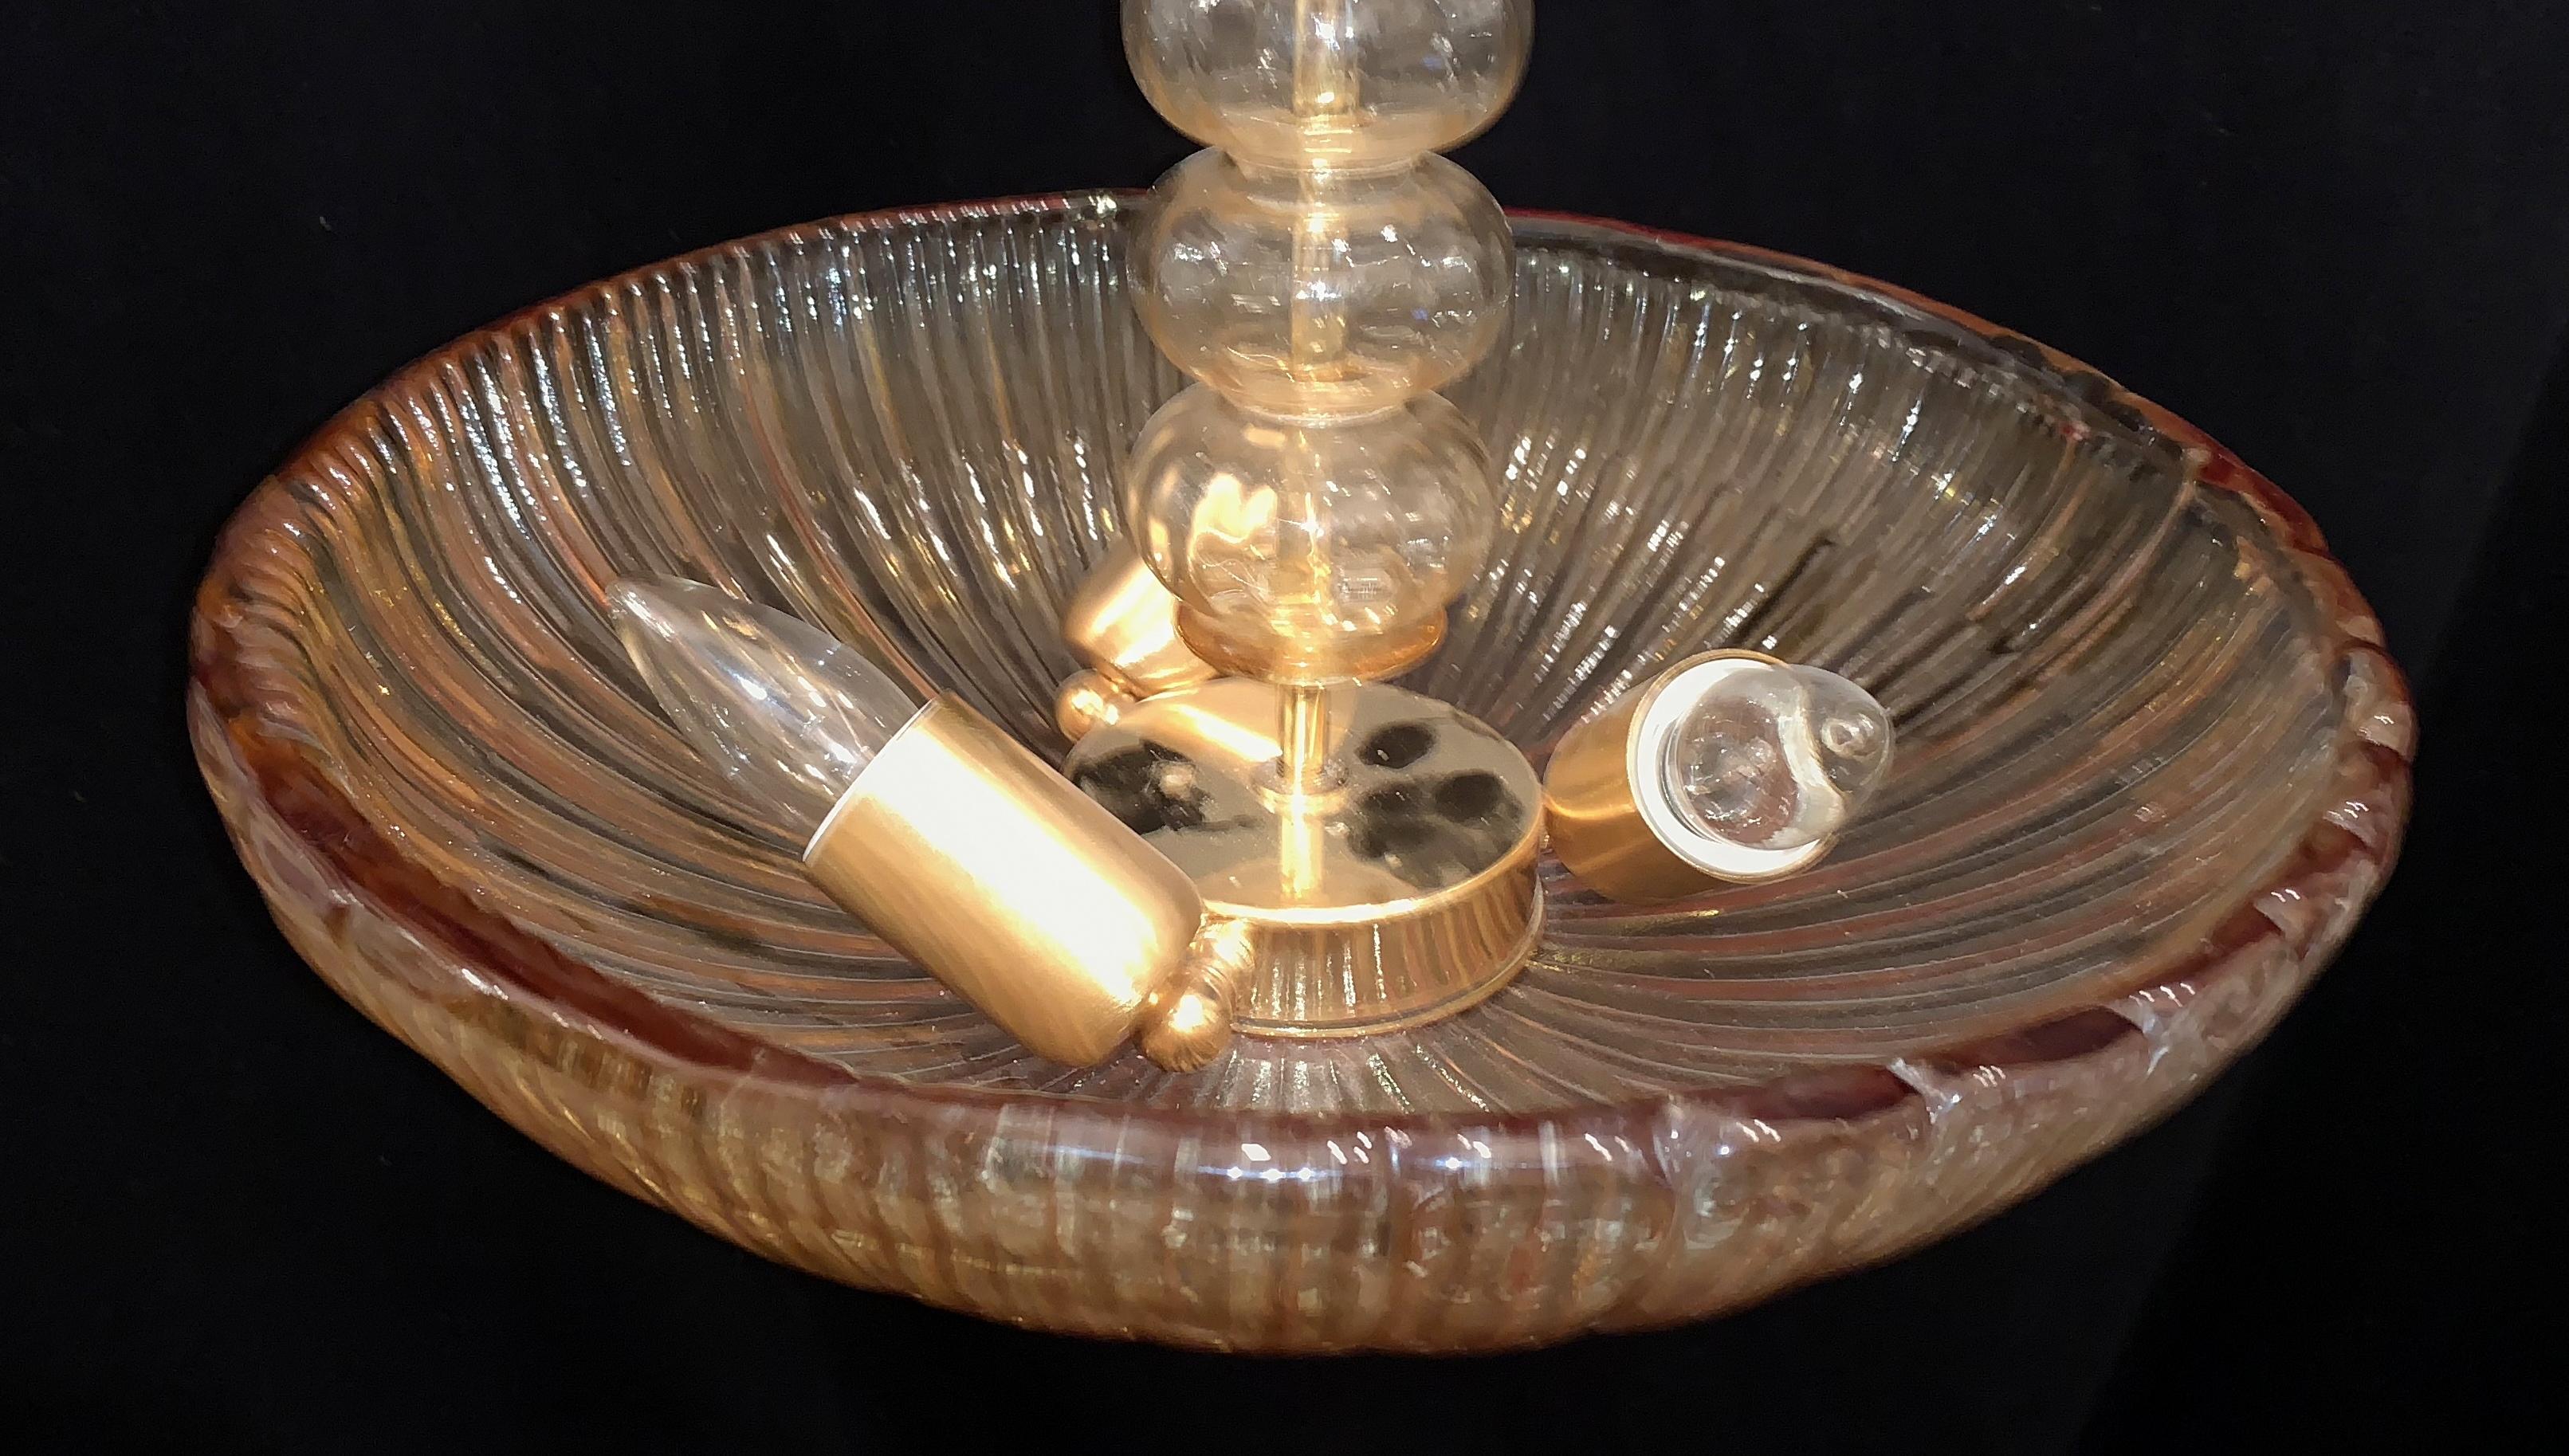 A wonderful midcentury Barovier Toso Seguso style Murano Italian ribbed amber glass dome light fixture chandelier with 3 Edison lights inside.
Completely rewired and ready to enjoy with all mounting hardware and canopy.
Height can be adjustable